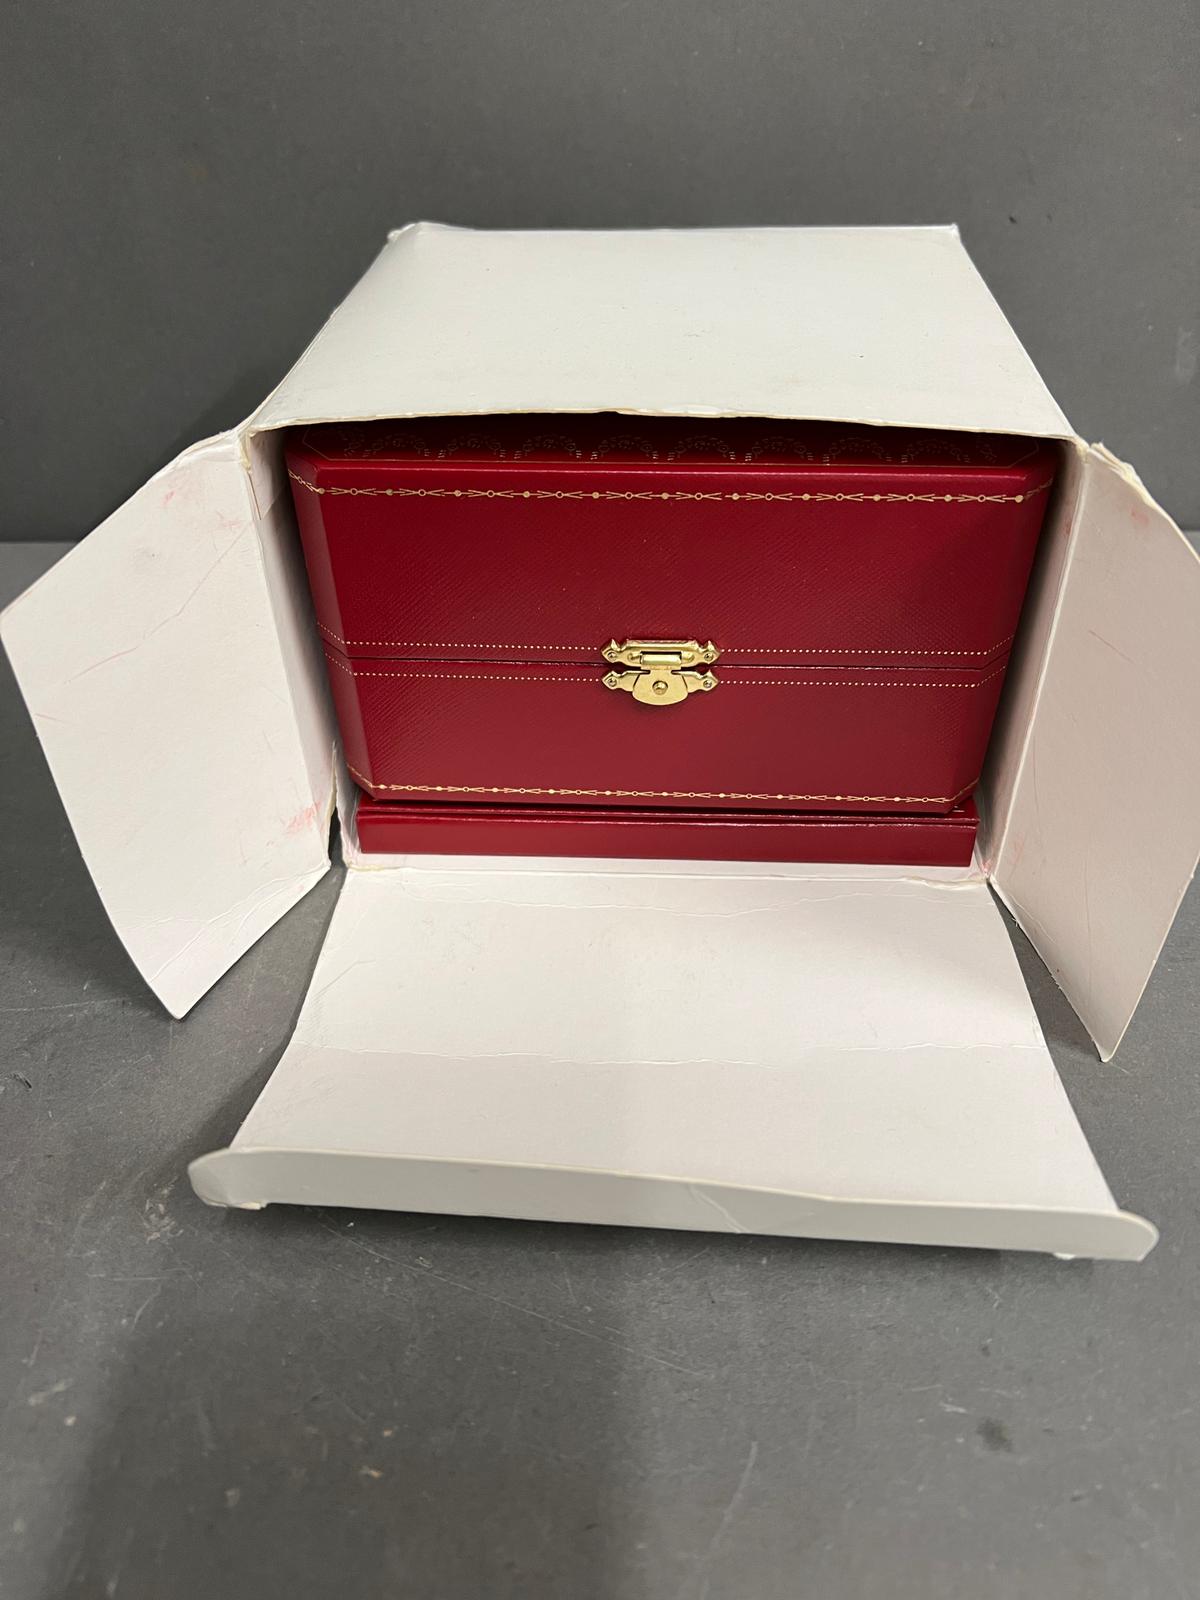 A Cartier watch box with booklet, cd and outer box - Image 2 of 4